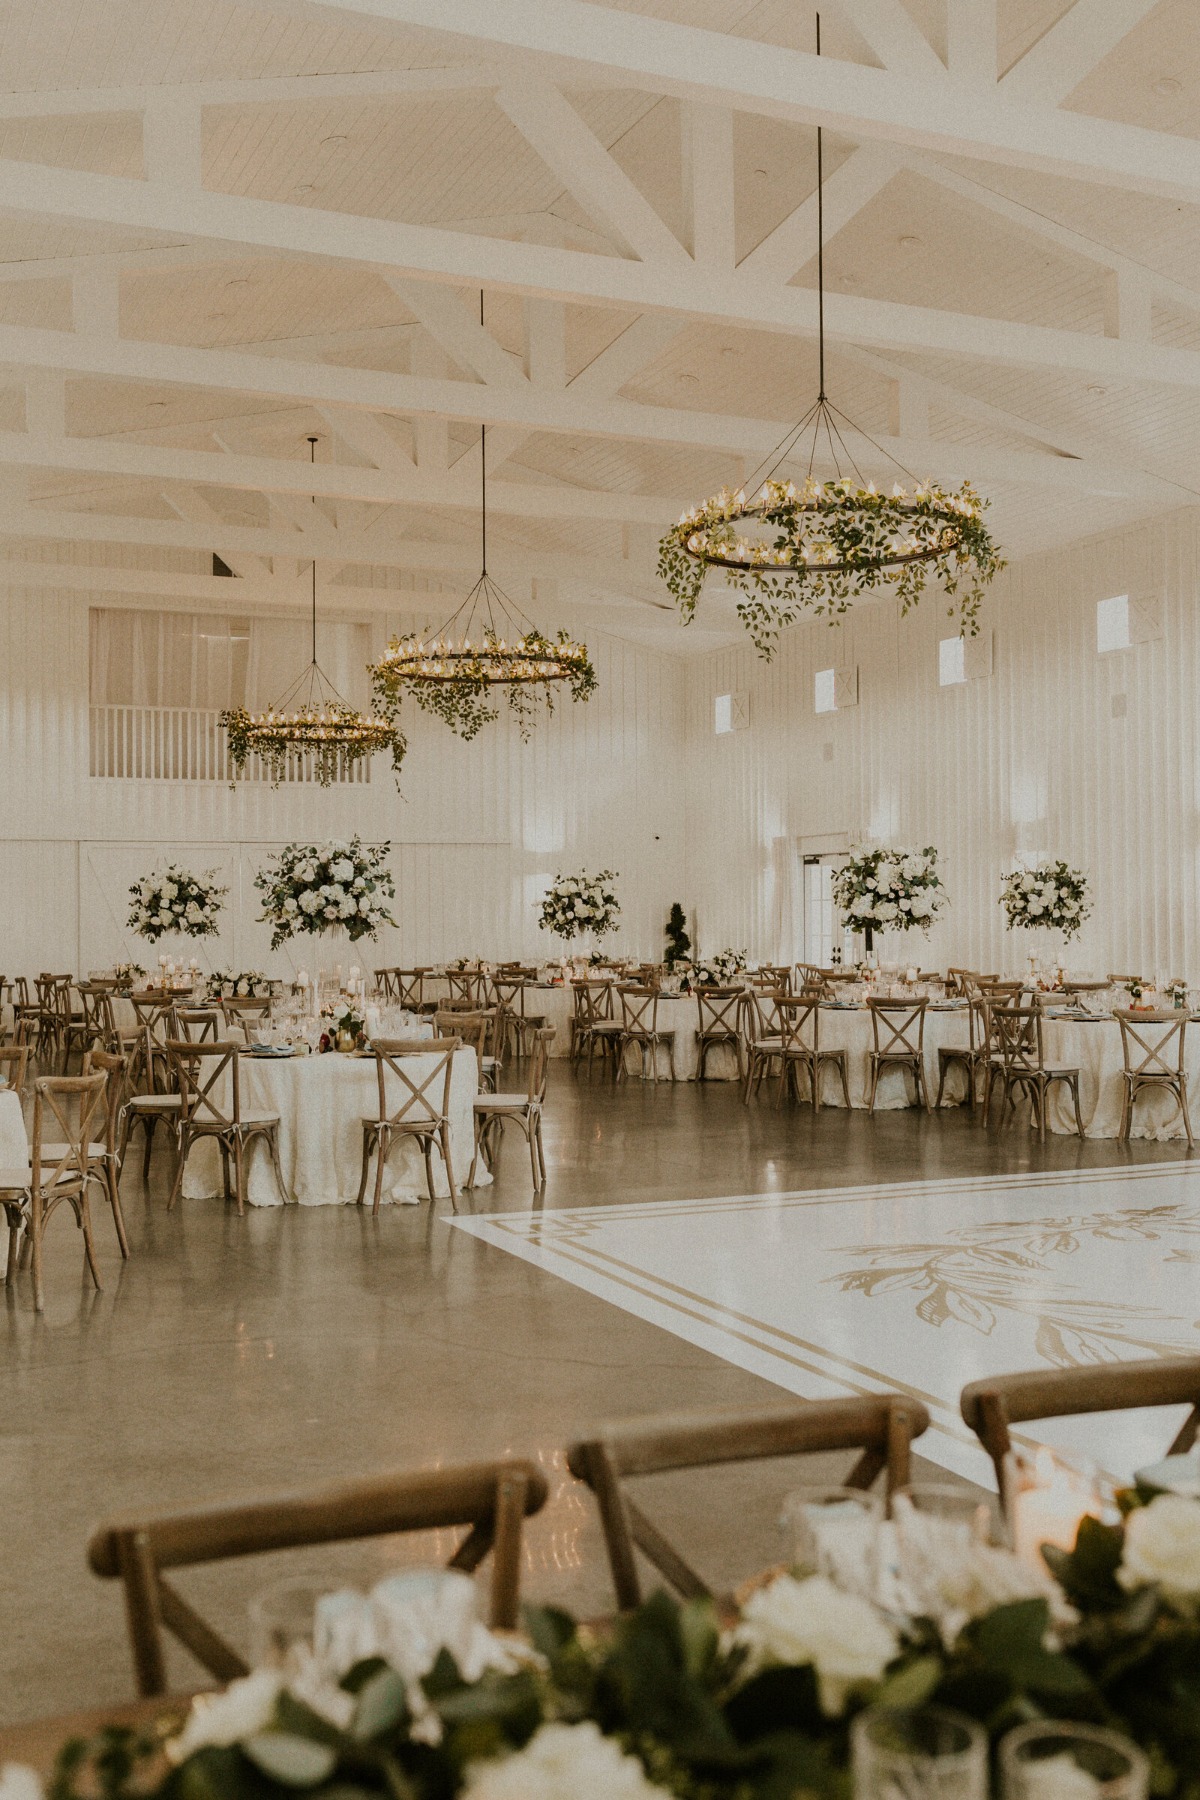 Reception hall with tables and tall centerpieces and wood chairs